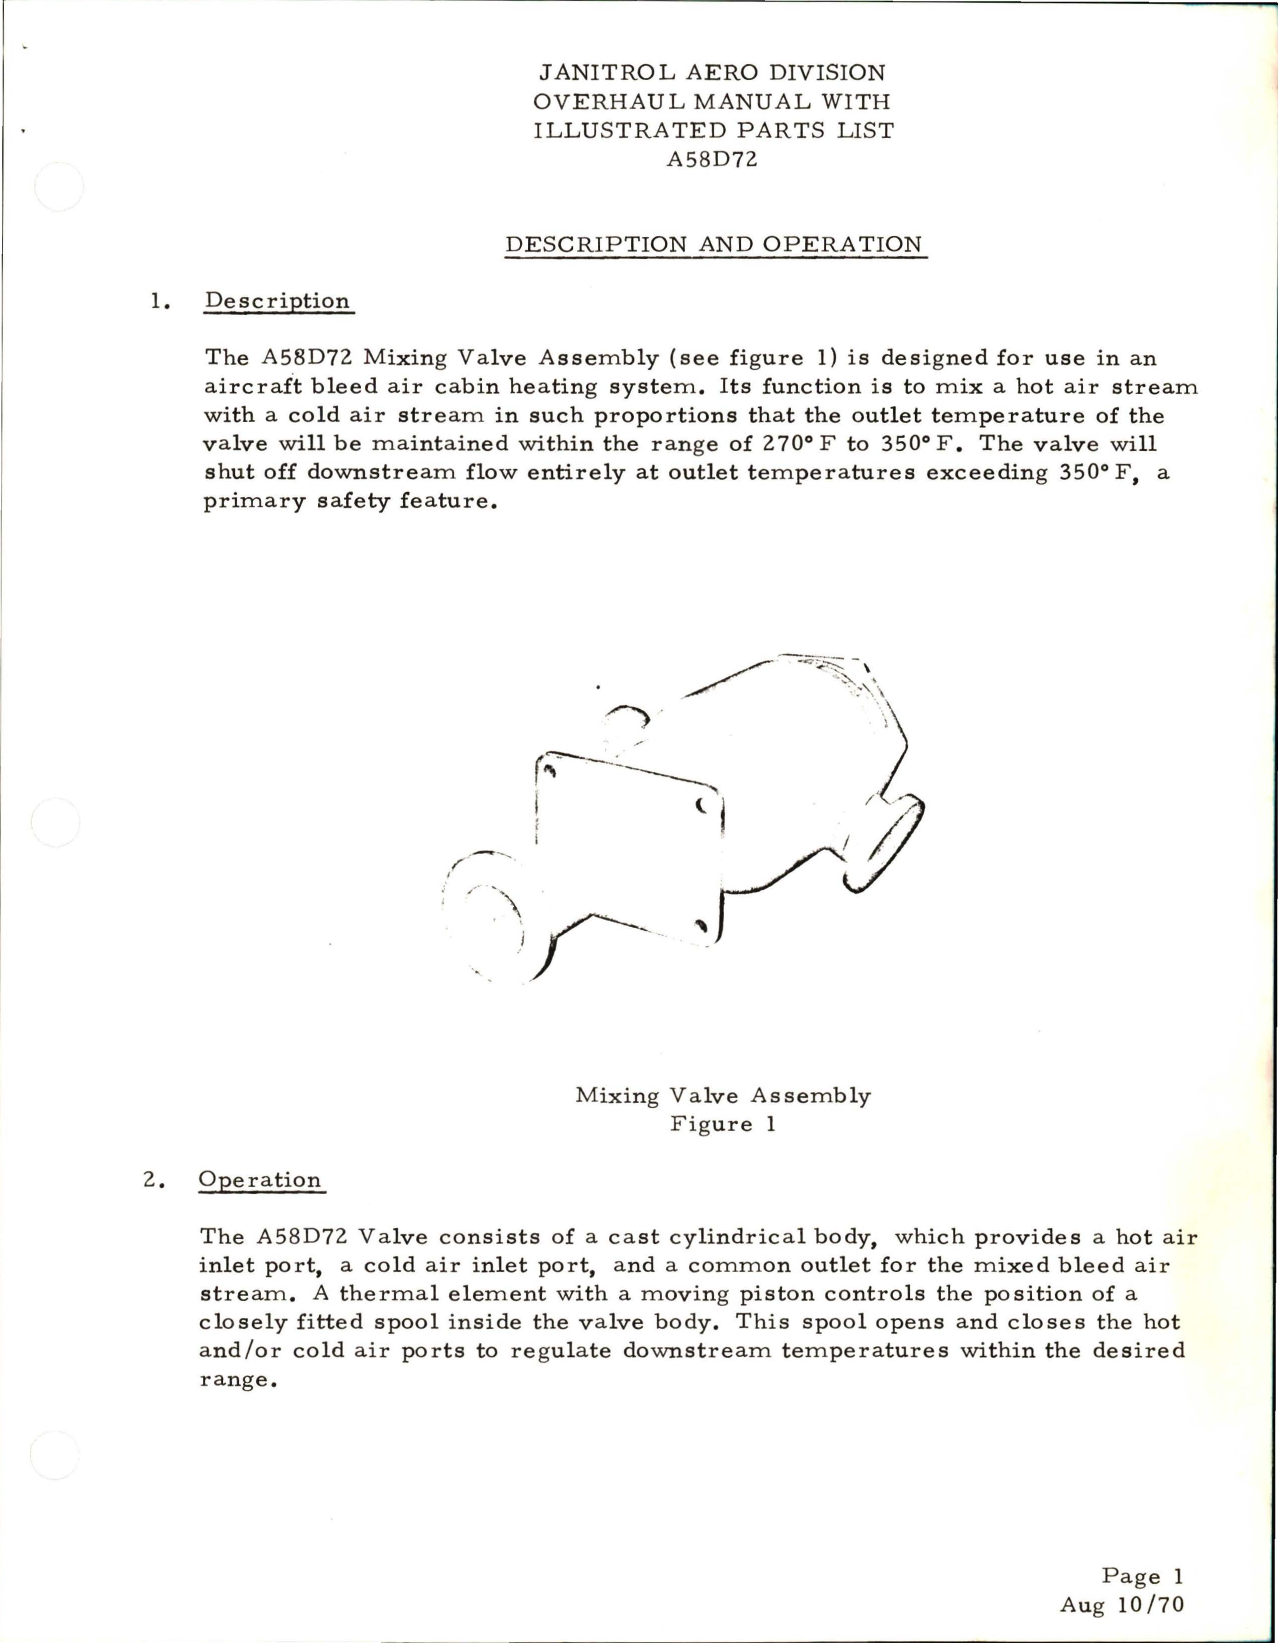 Sample page 7 from AirCorps Library document: Overhaul with Illustrated Parts List for Mixing Valve Assembly - Part A58D72 